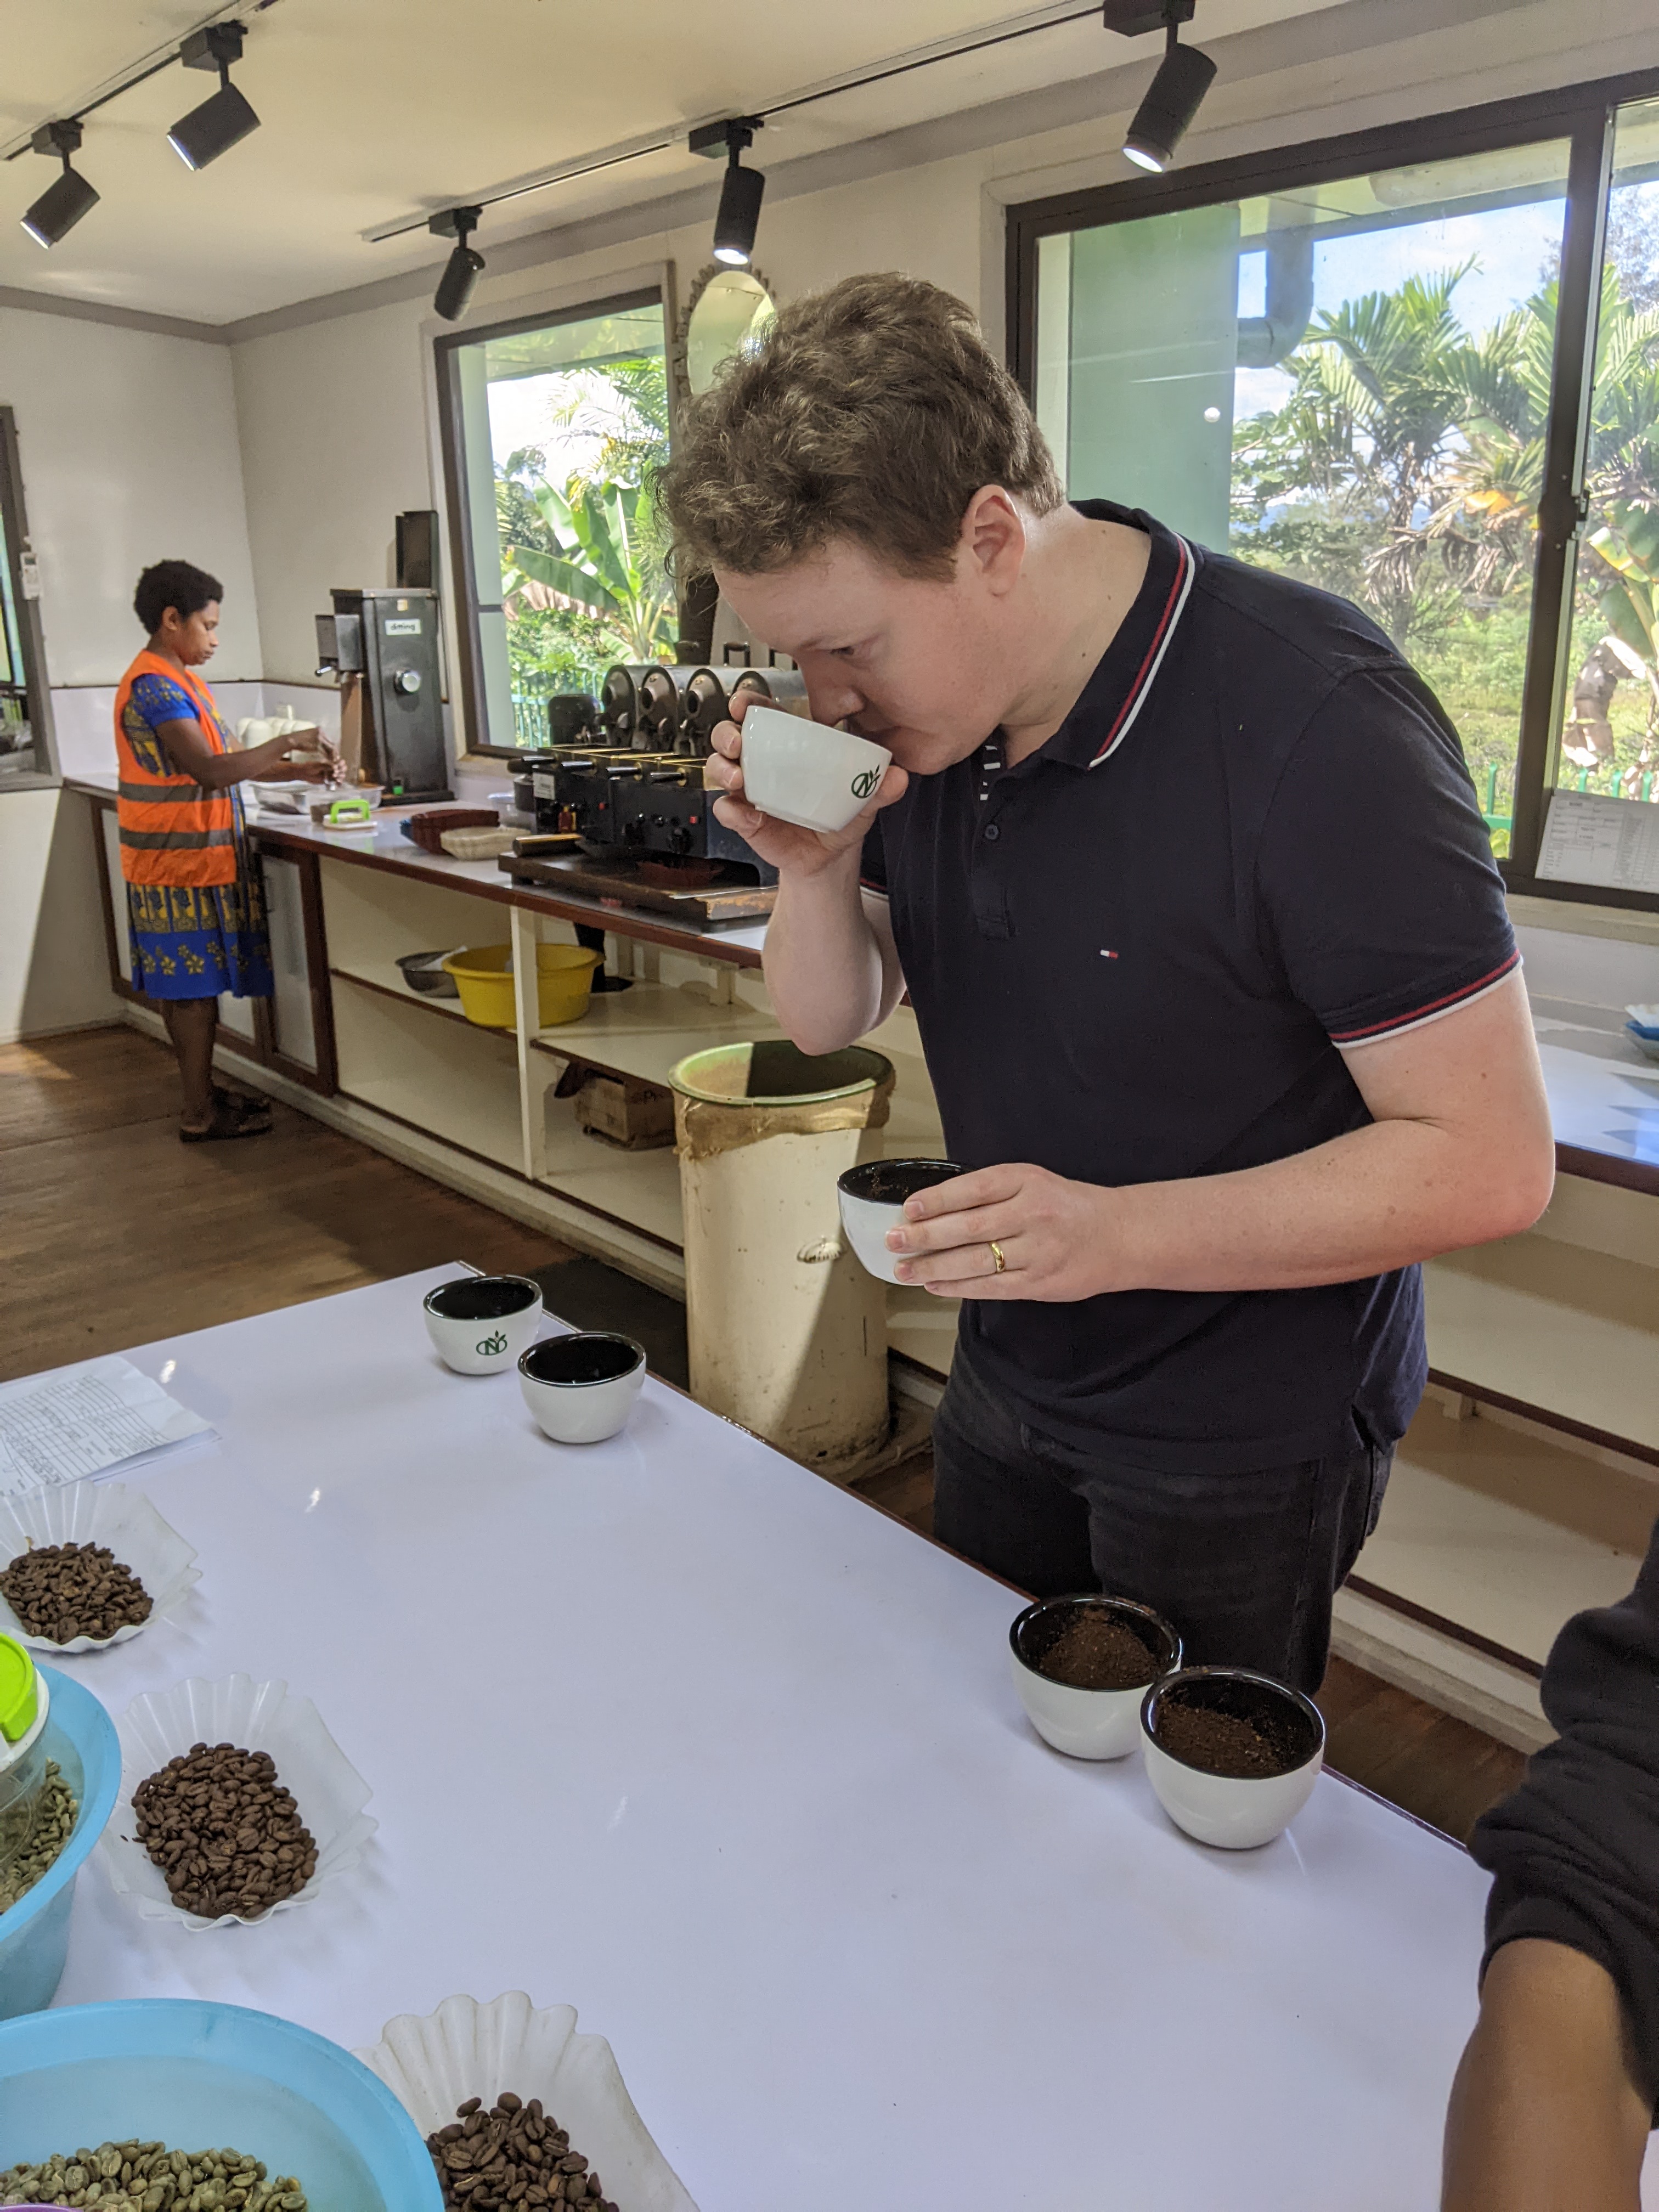 George smelling ground coffee beans during grading